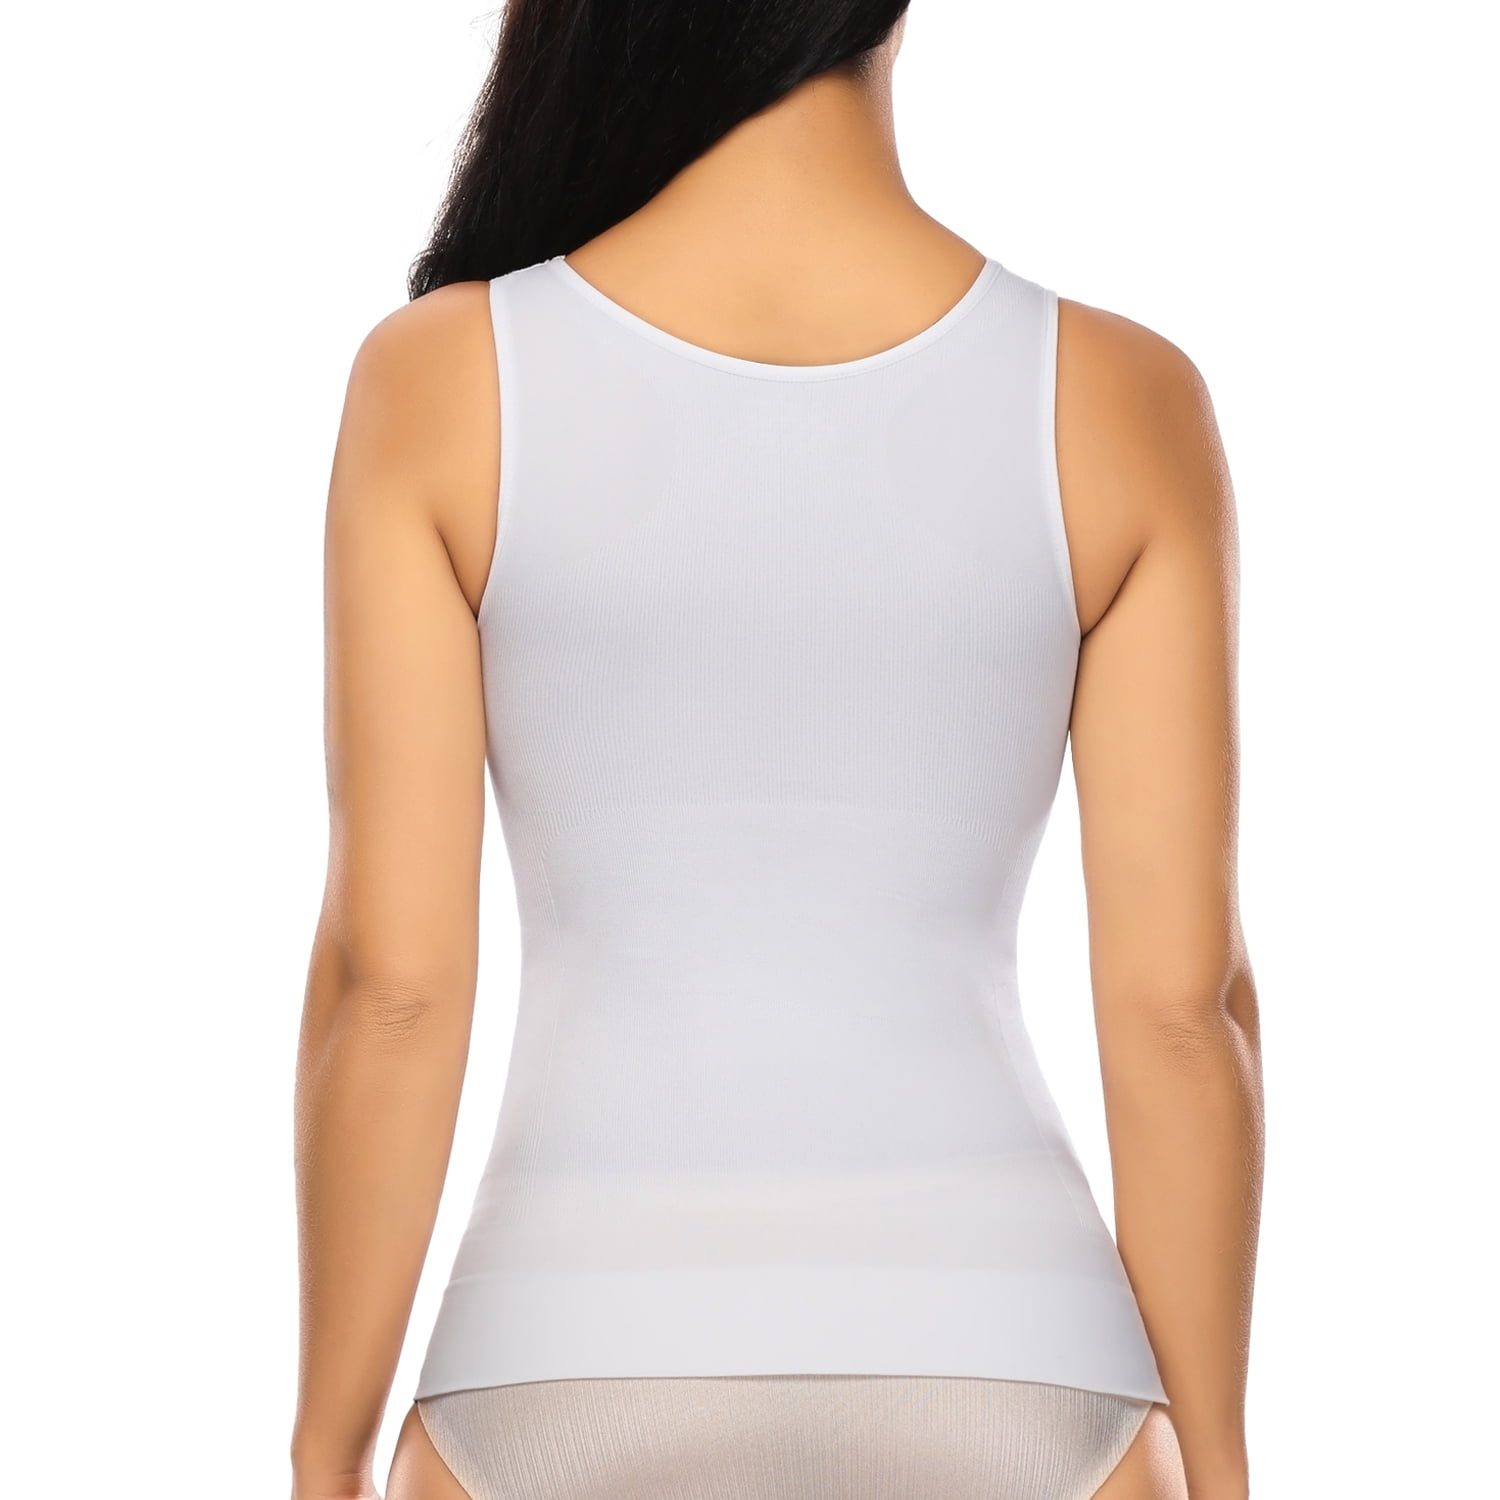 QRIC Tummy Control Camisole for Women Shapewear Tank Tops with